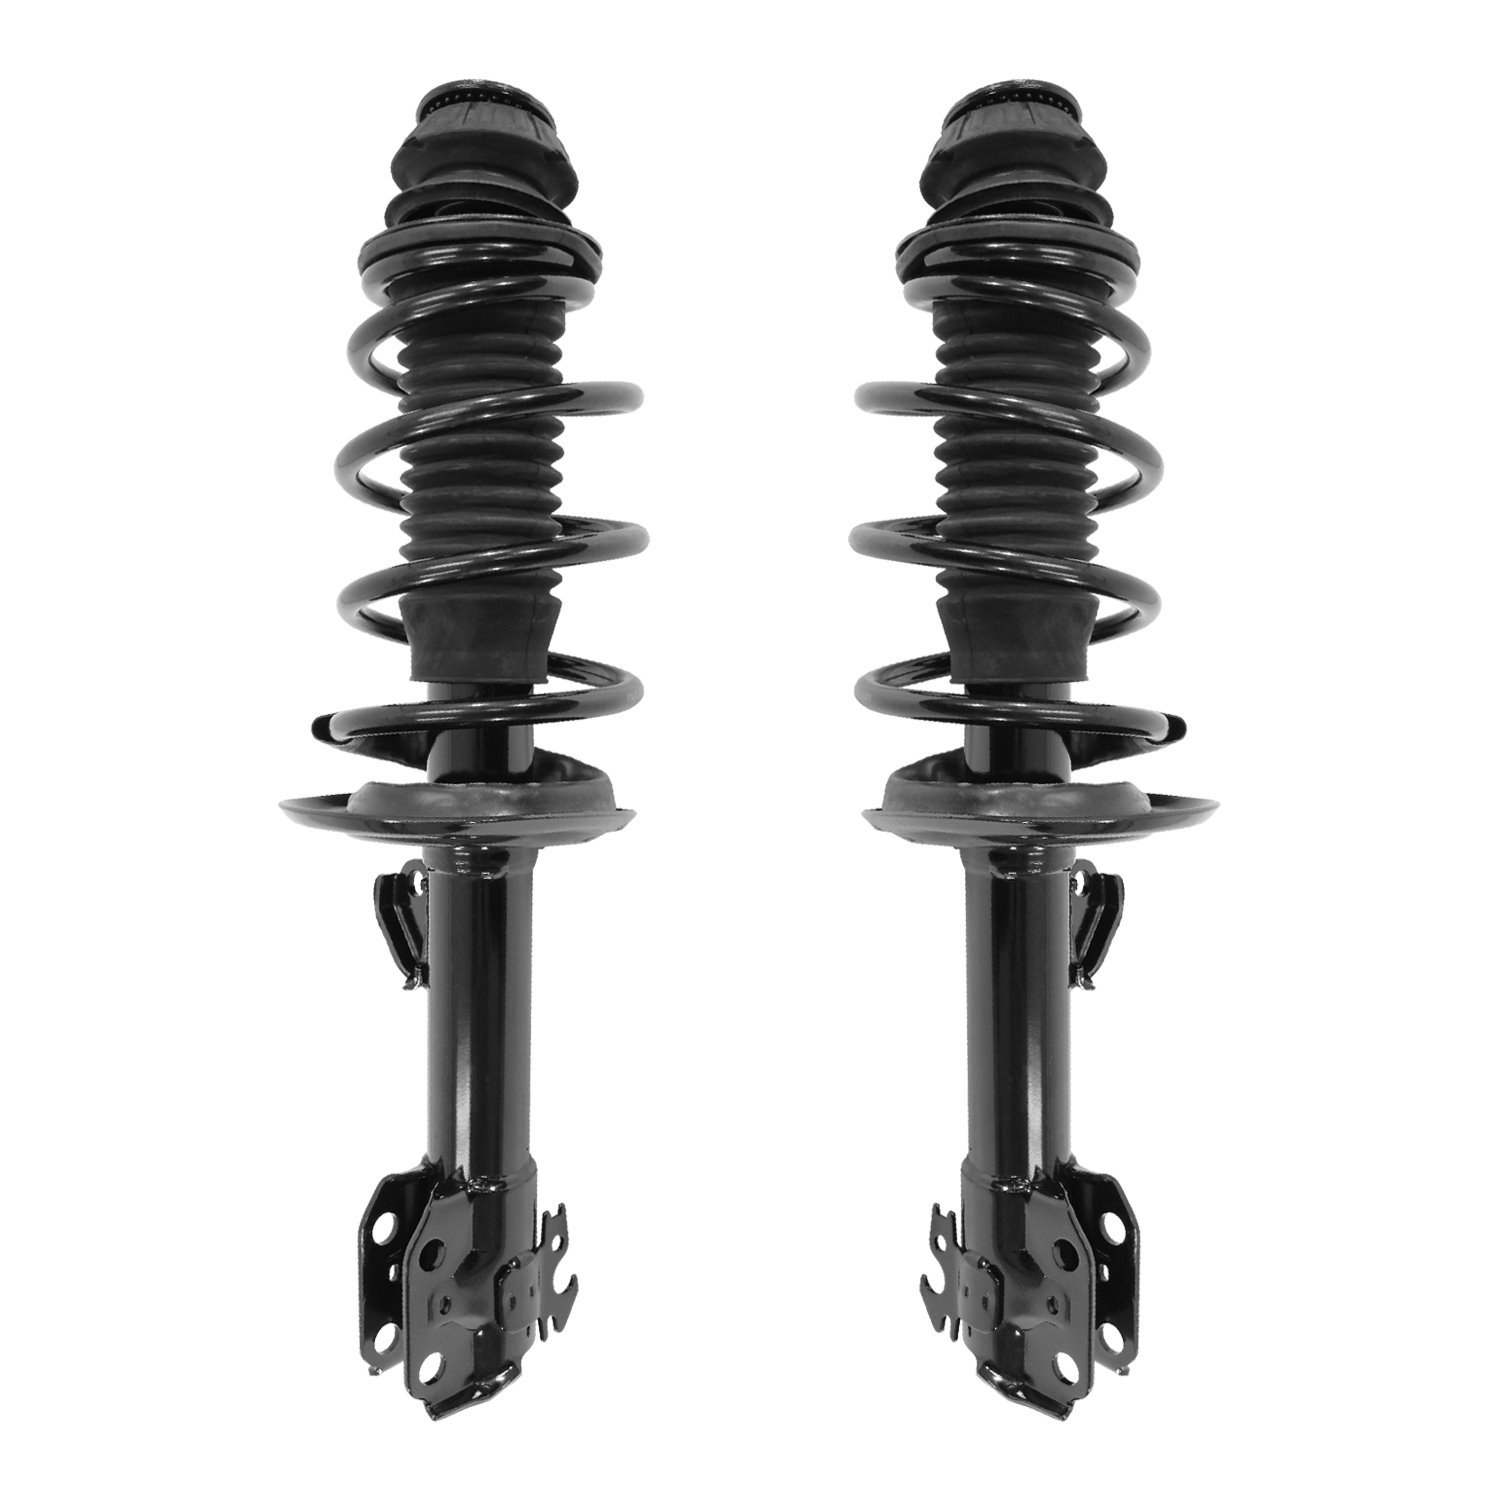 2-13331-13332-001 Front Suspension Strut & Coil Spring Assemby Set Fits Select Scion xD